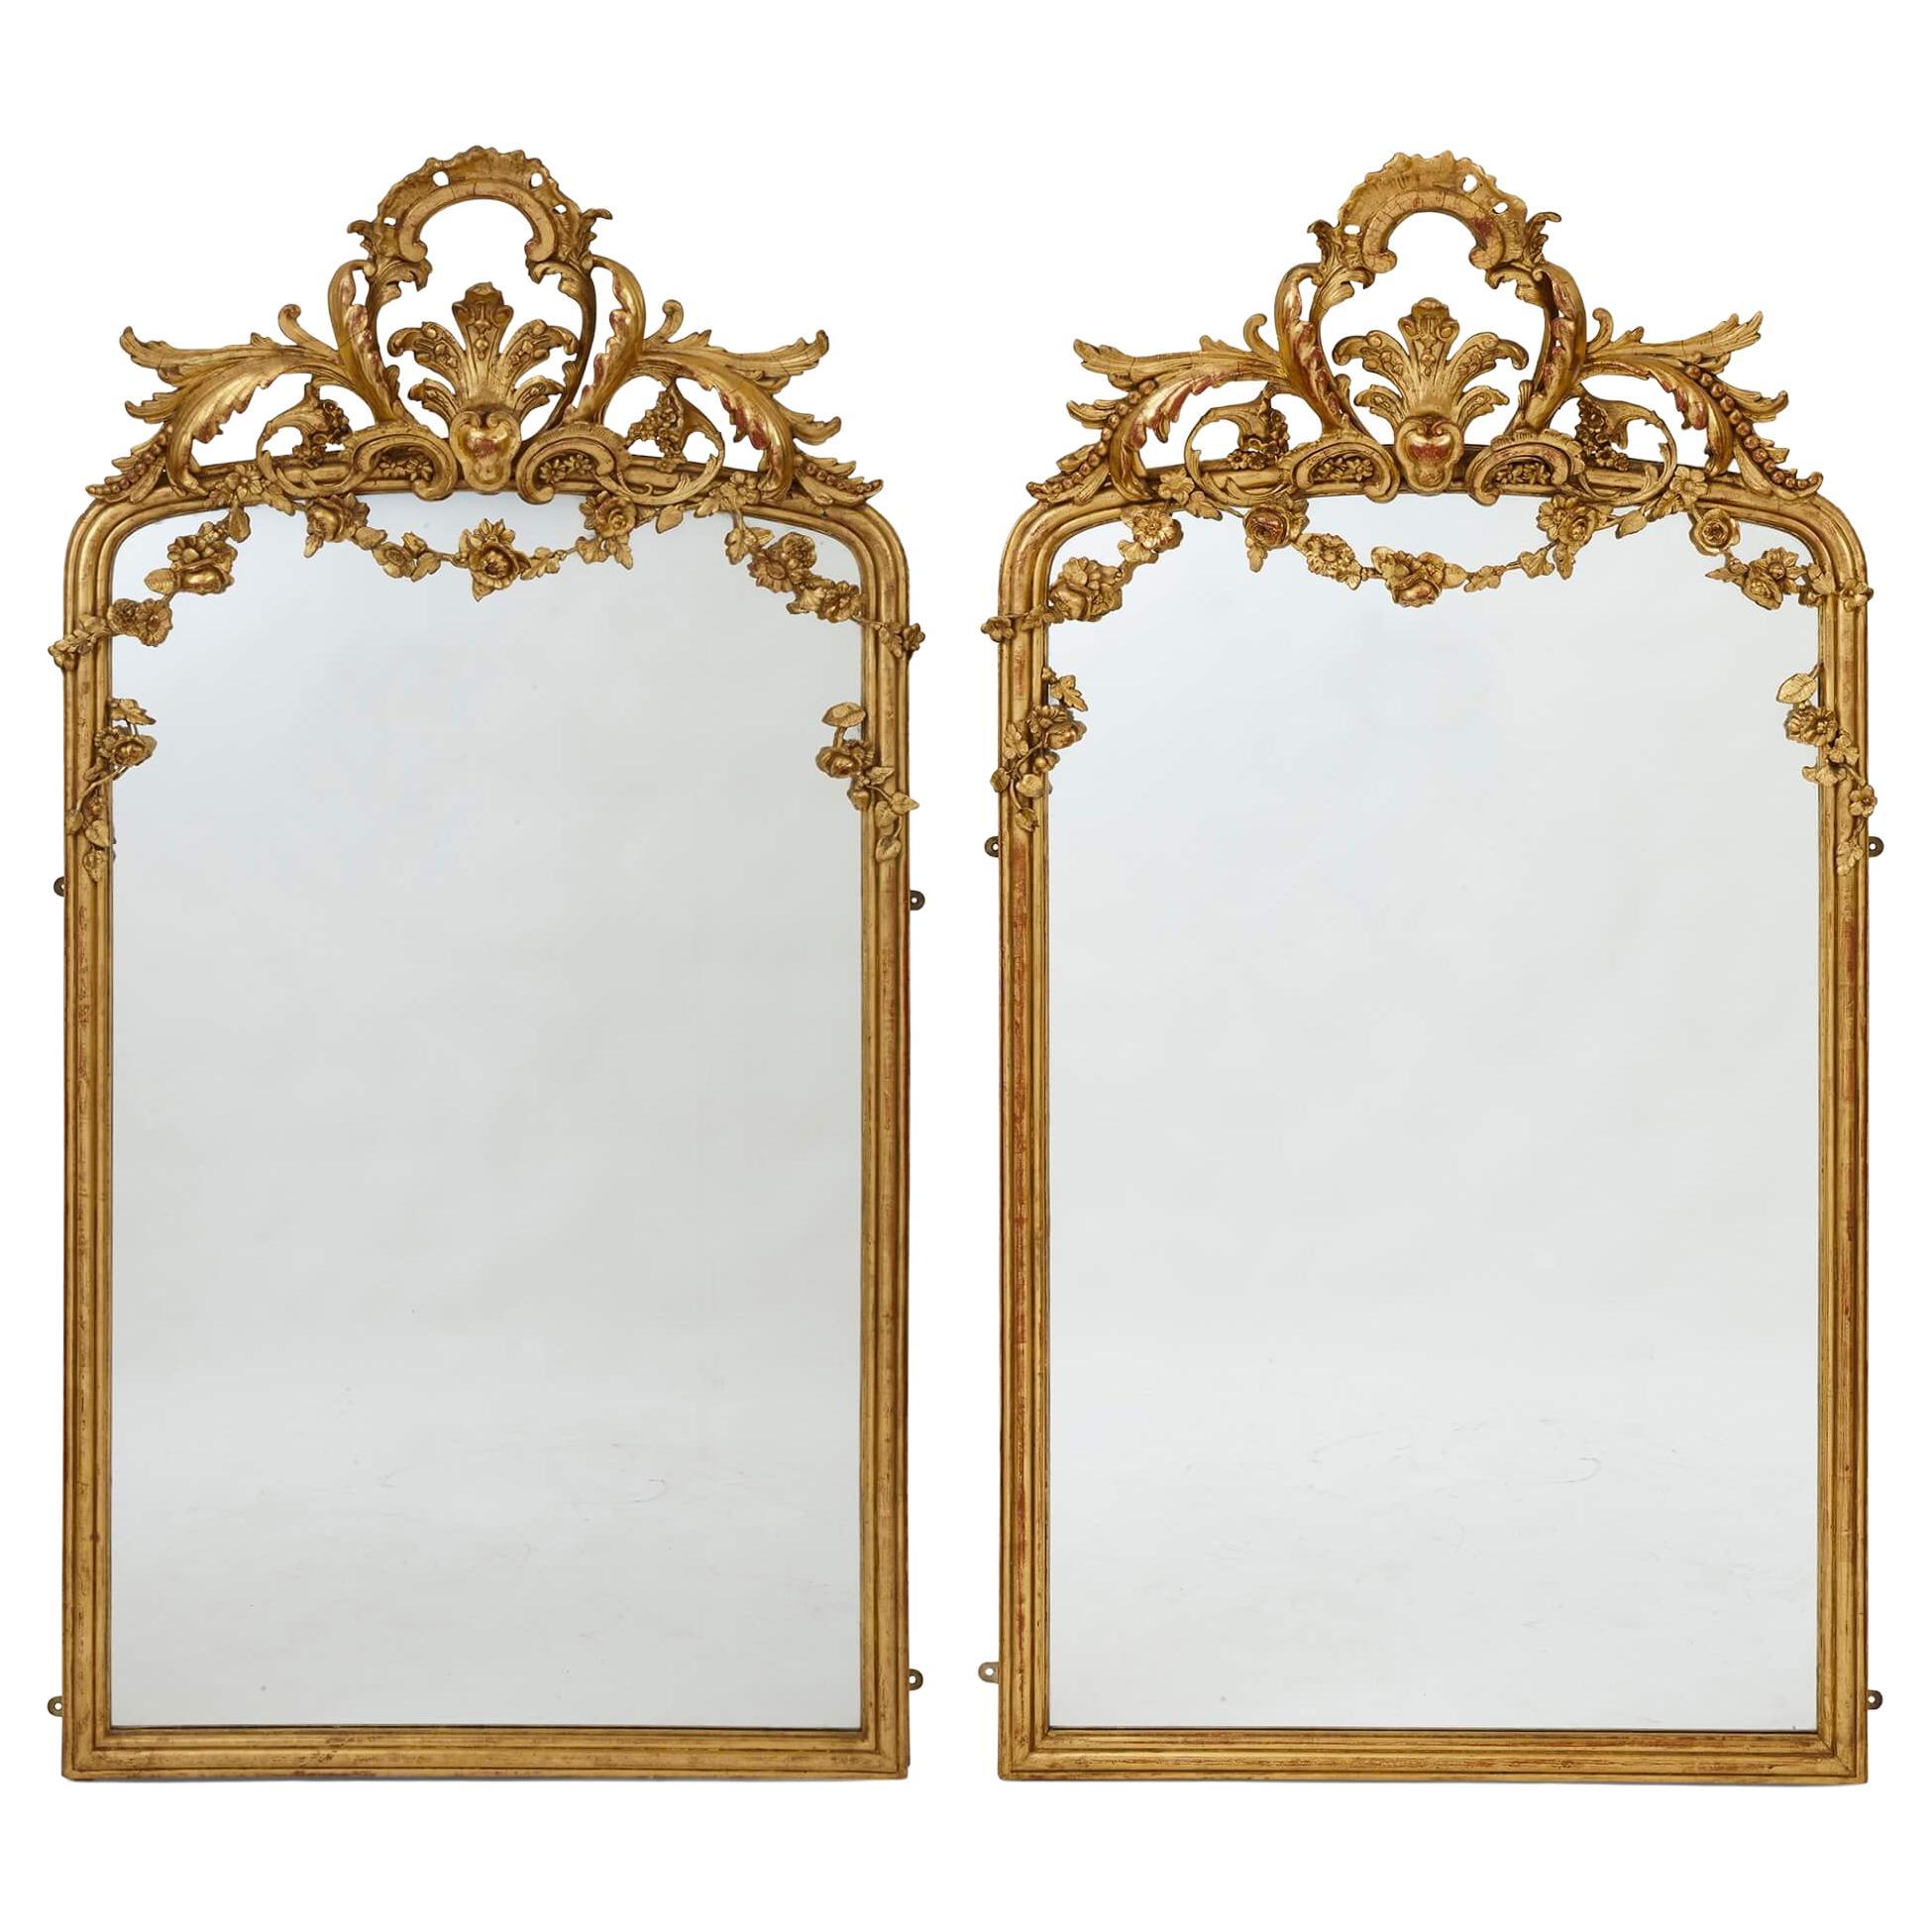 Pair of Large French Rococo Revival Giltwood Wall Mirrors For Sale